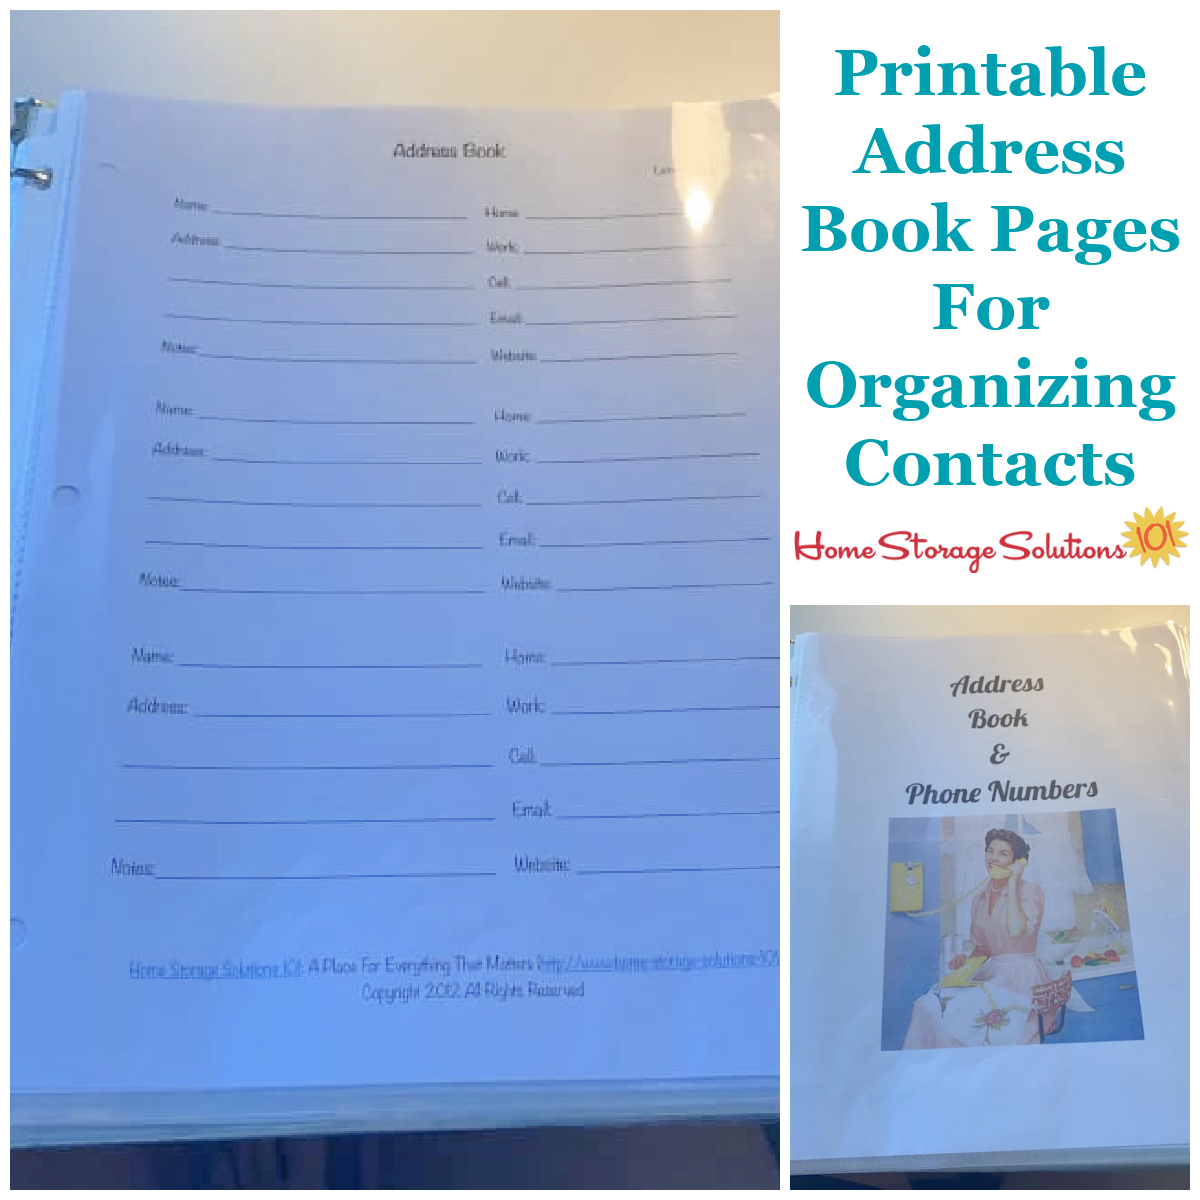 Free Printable Address Book Pages Get Your Contact Information Organized - Free Printable Address Book Pages